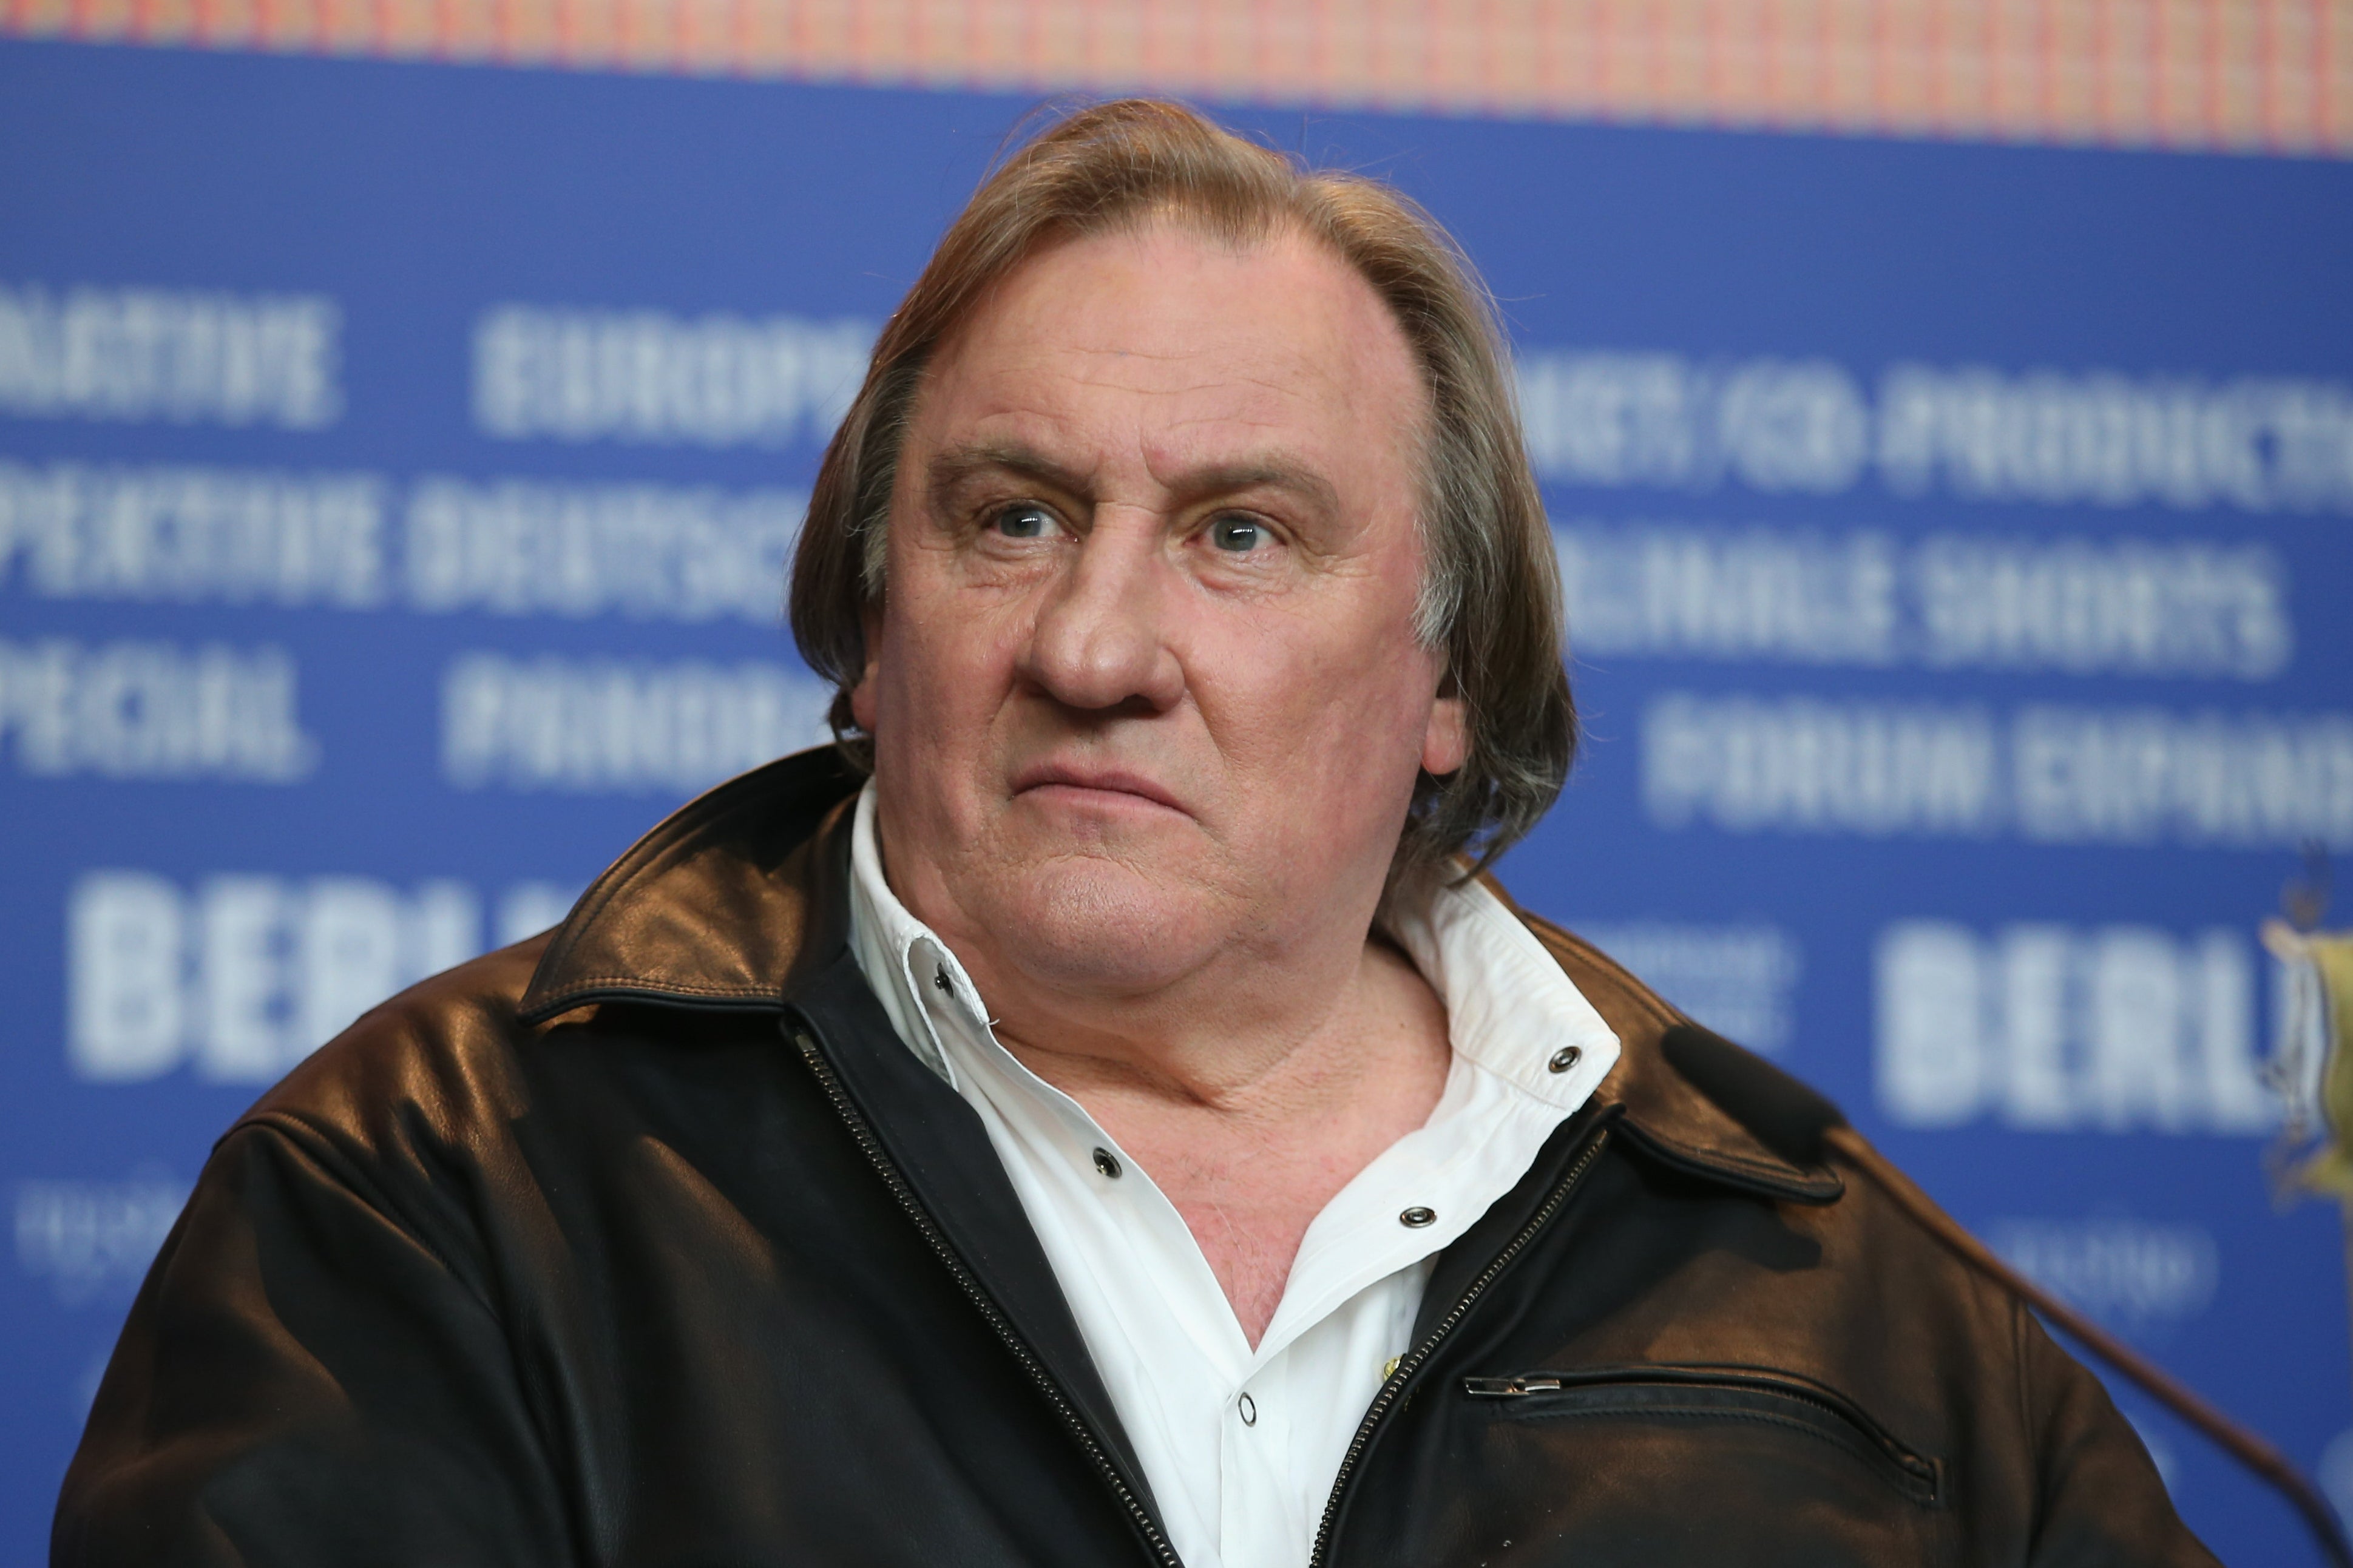 Depardieu pictured at a press conference for ‘Saint Amour’ in 2016